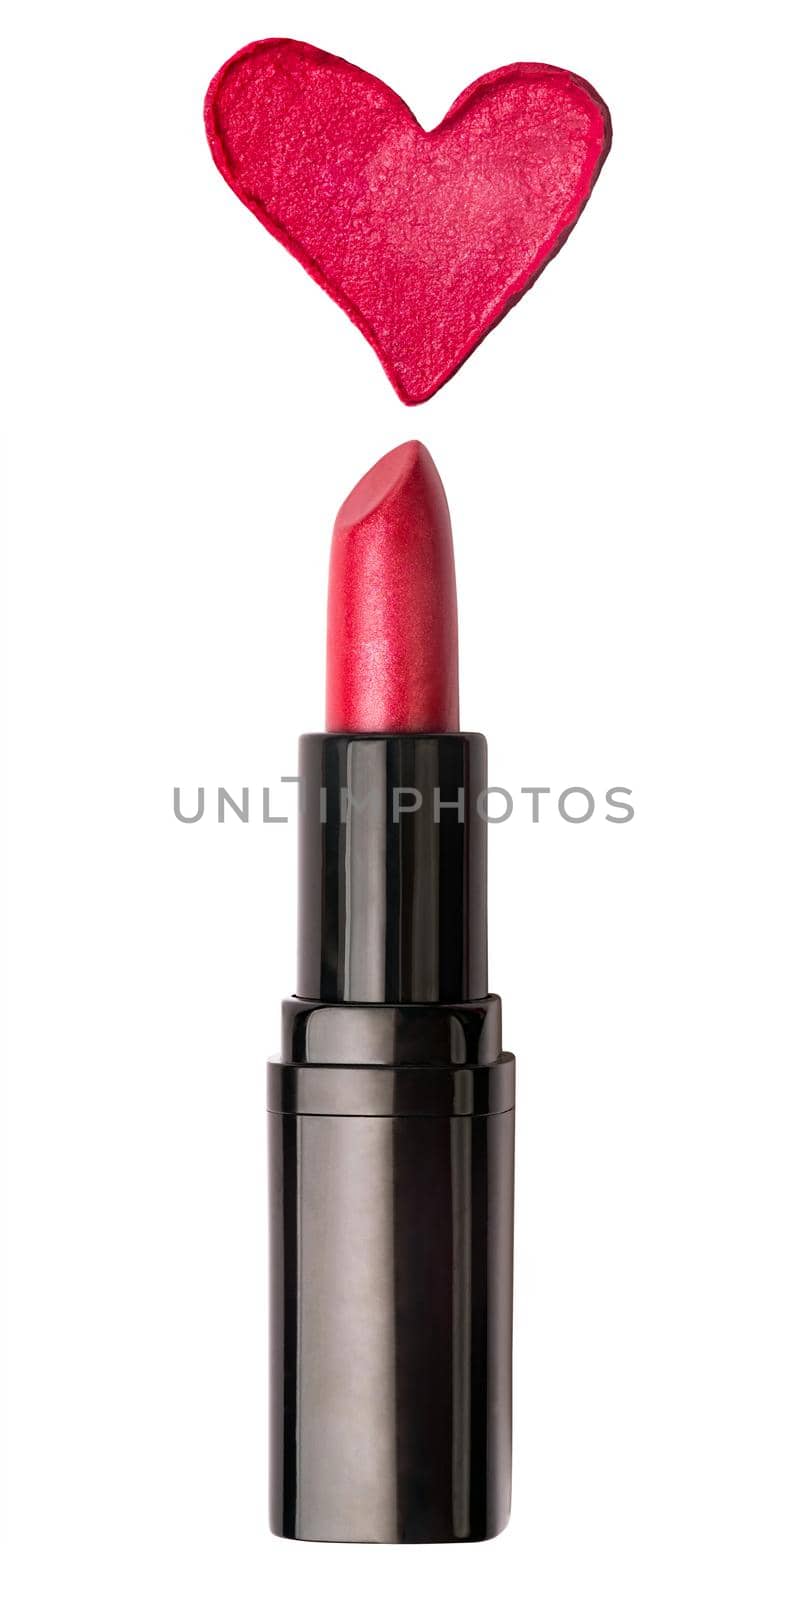 Red lipstick with a lipstick heart shape stroke isolated on a white background. Cosmetics concept